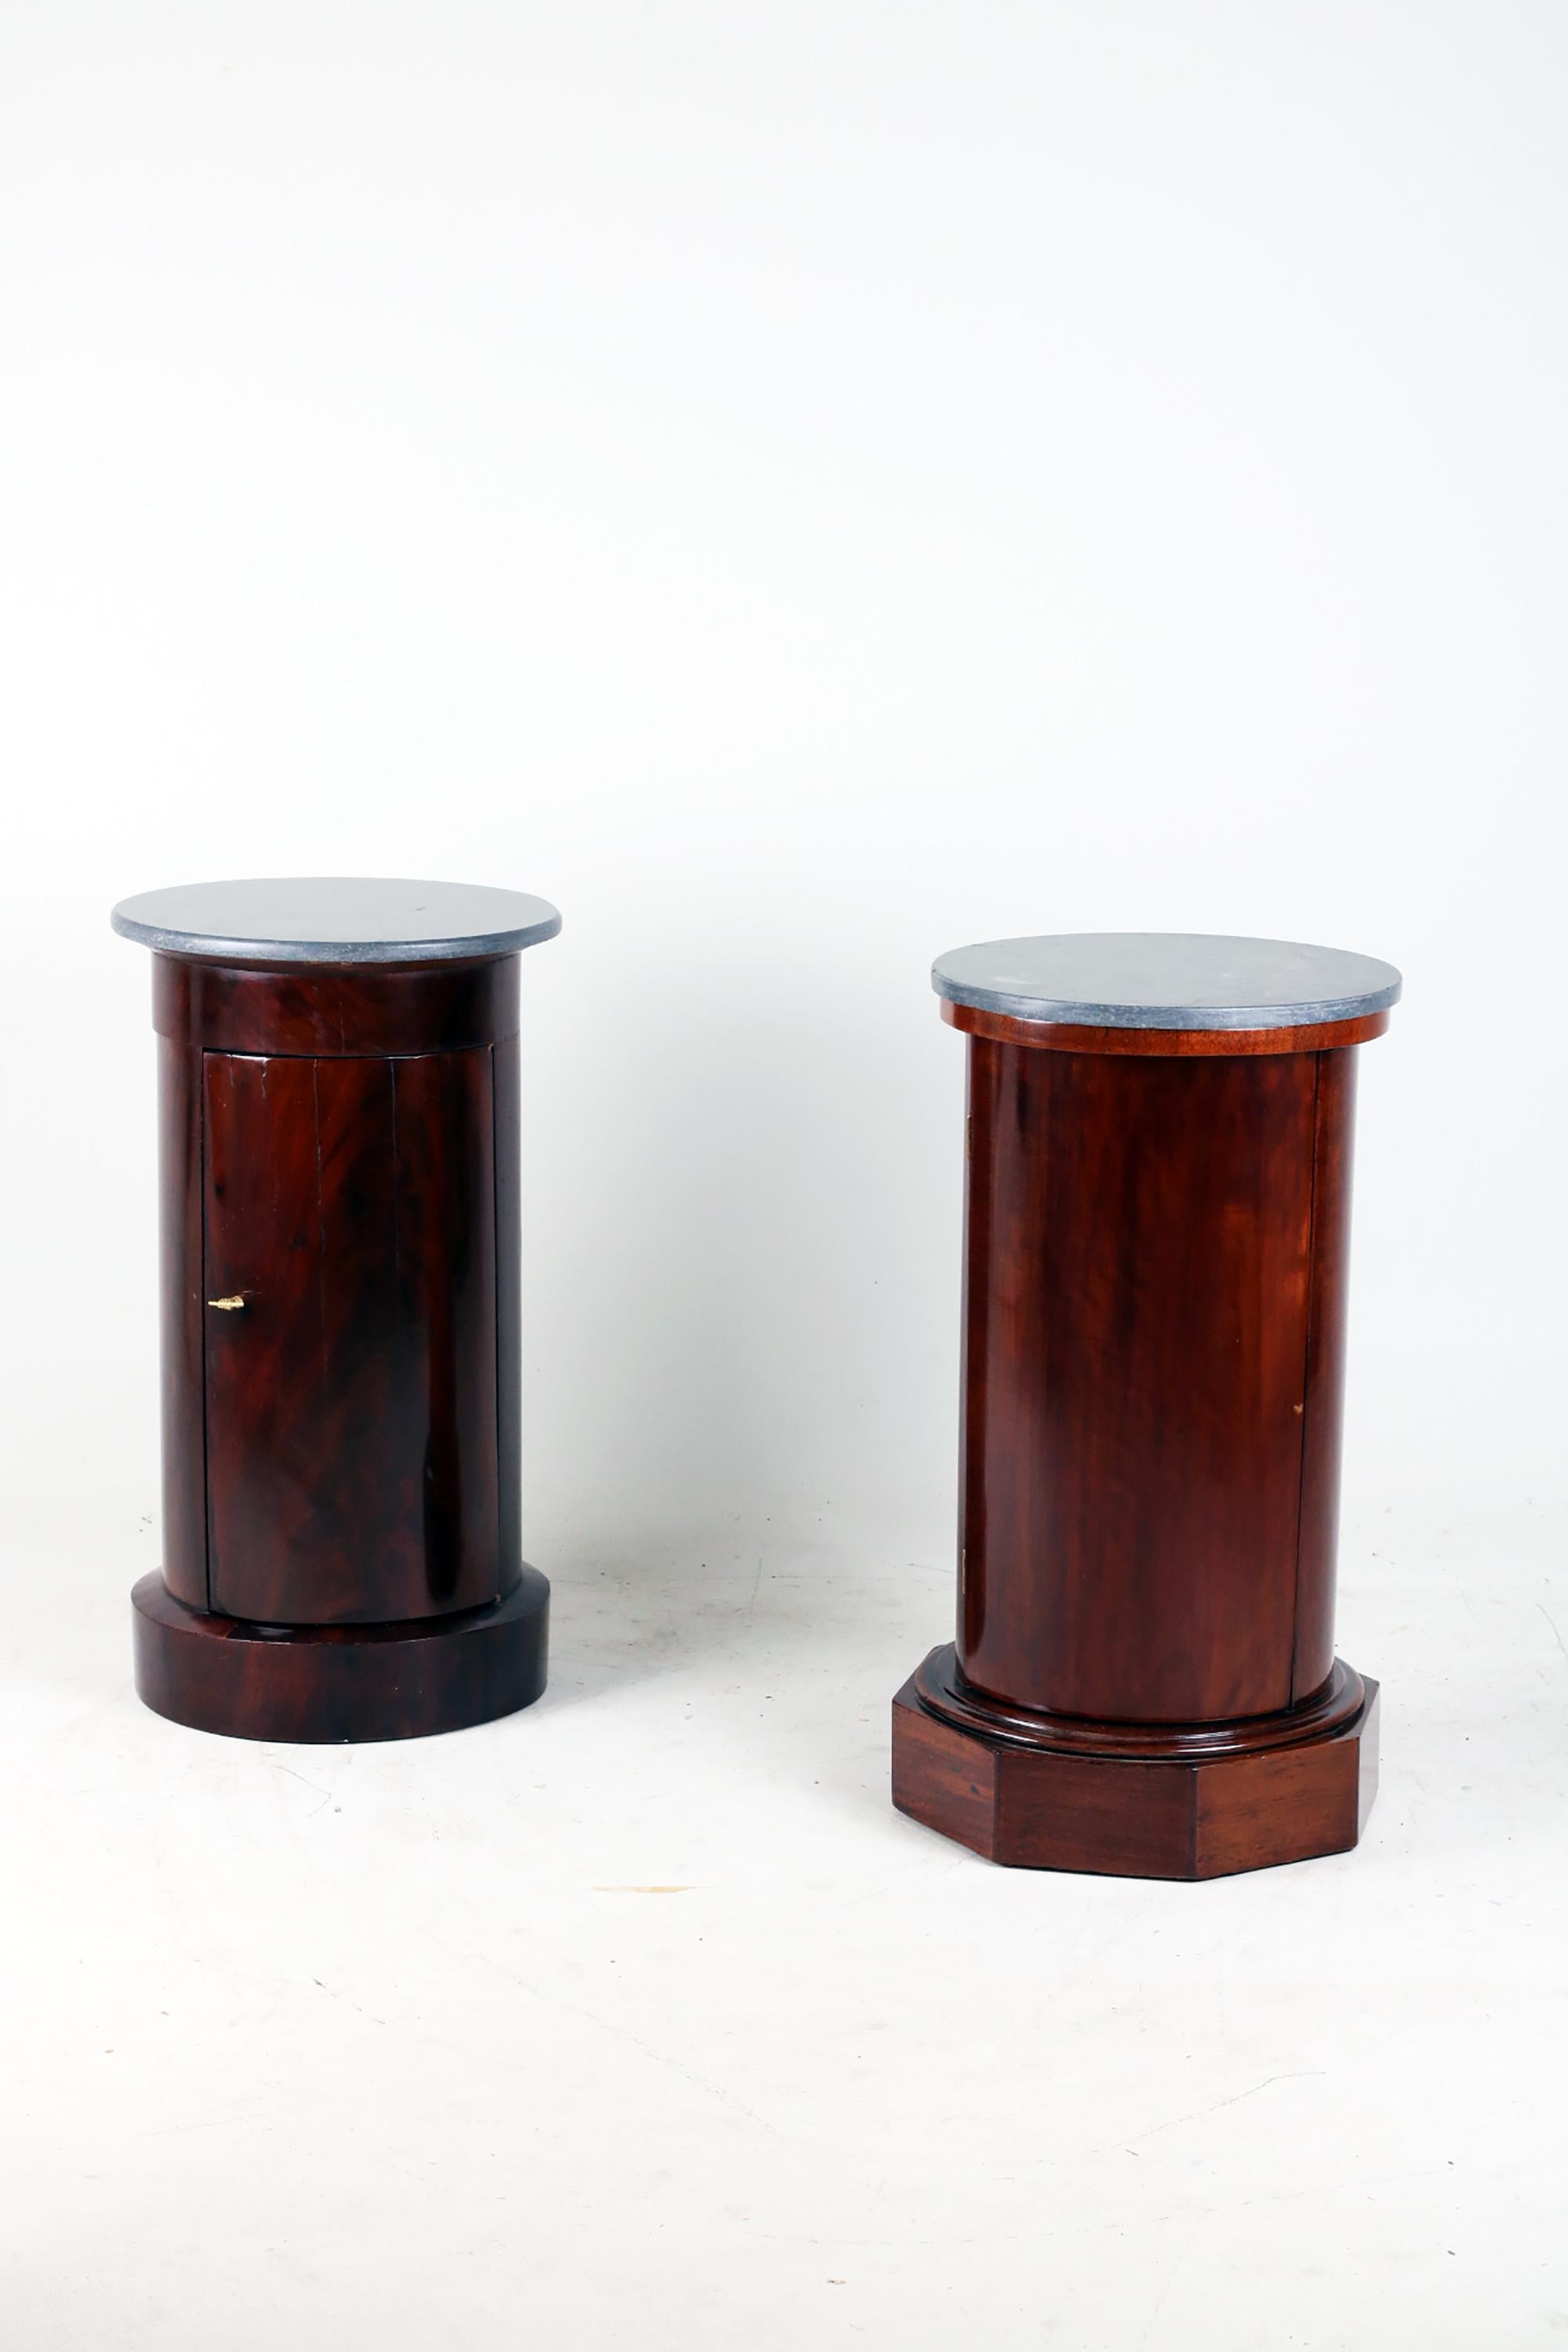 Mid-19th Century 19th Century Pair French Neoclassic Mahogany Drum Cabinets For Sale